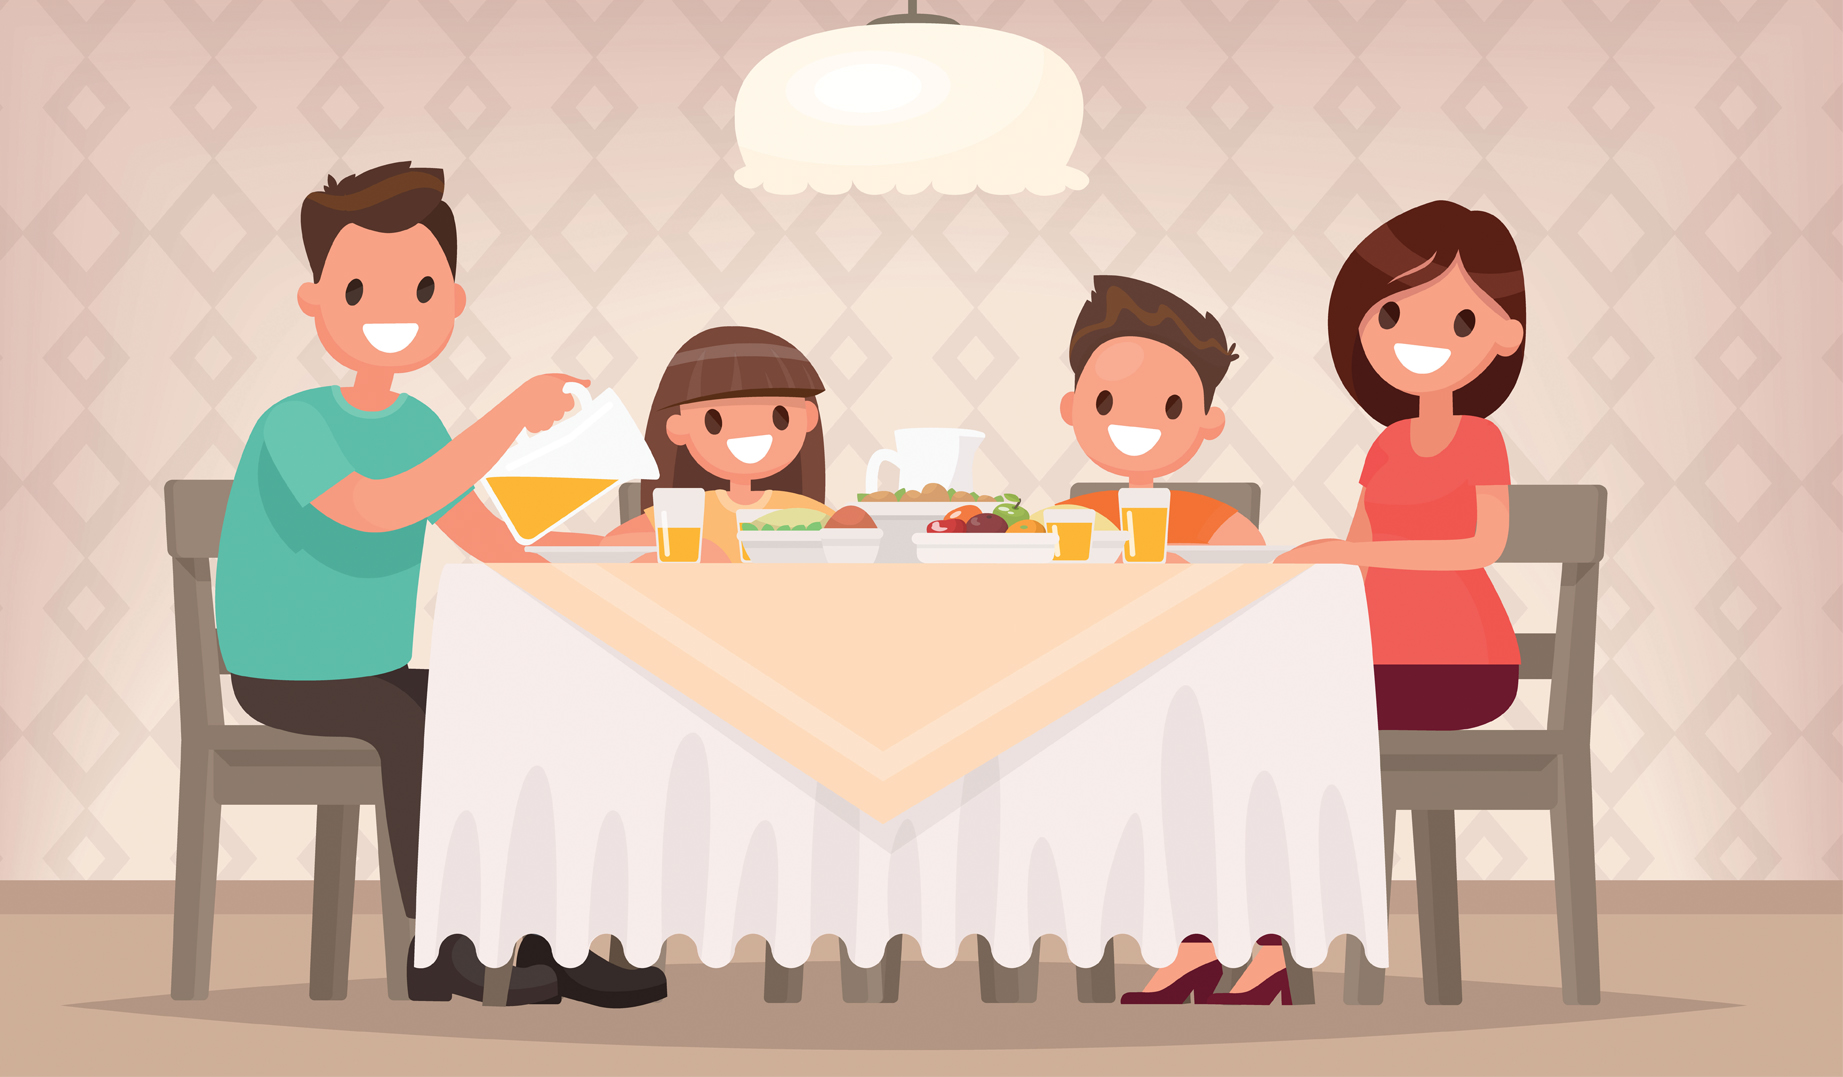 5 tips to make family mealtimes more mindful